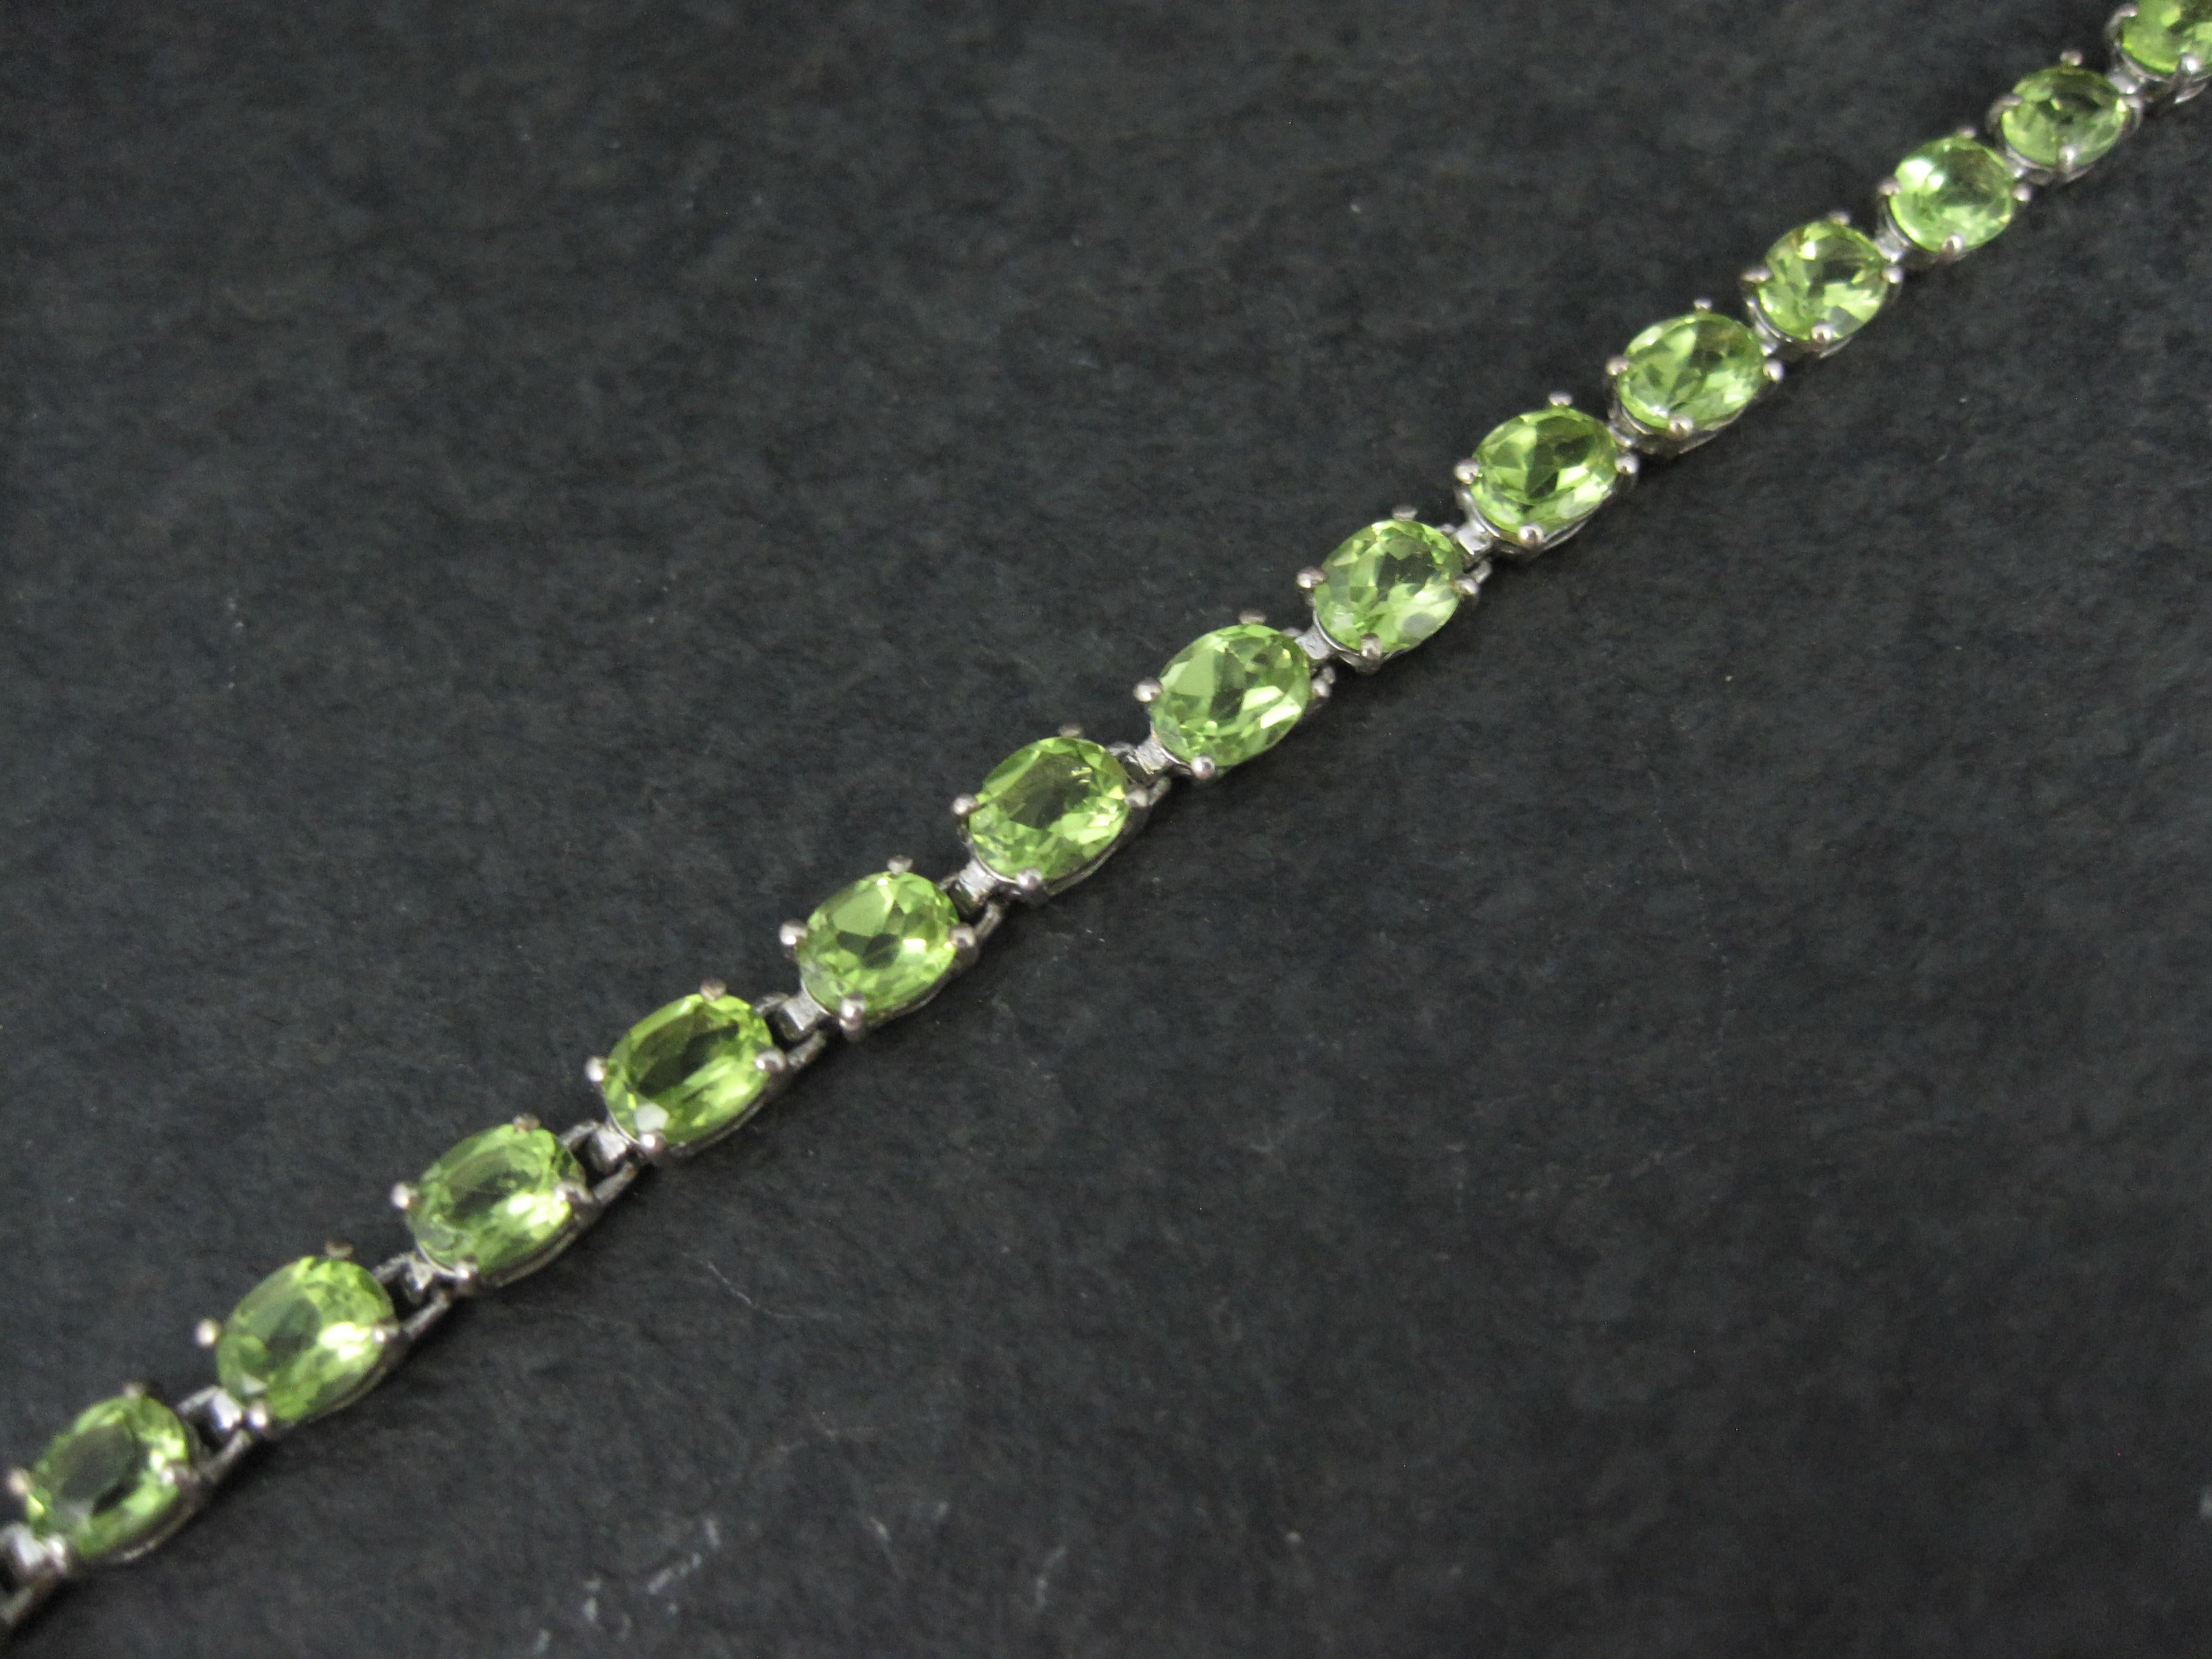 This beautiful bracelet is sterling silver.
It features 28 oval cut 4x6mm peridot gemstones at an estimated 11.50 total carats.
Measurements: 3/16 of an inch wide, 7 1/2 wearable inches
Marks: 925
Weight: 6.6 grams
New old stock
